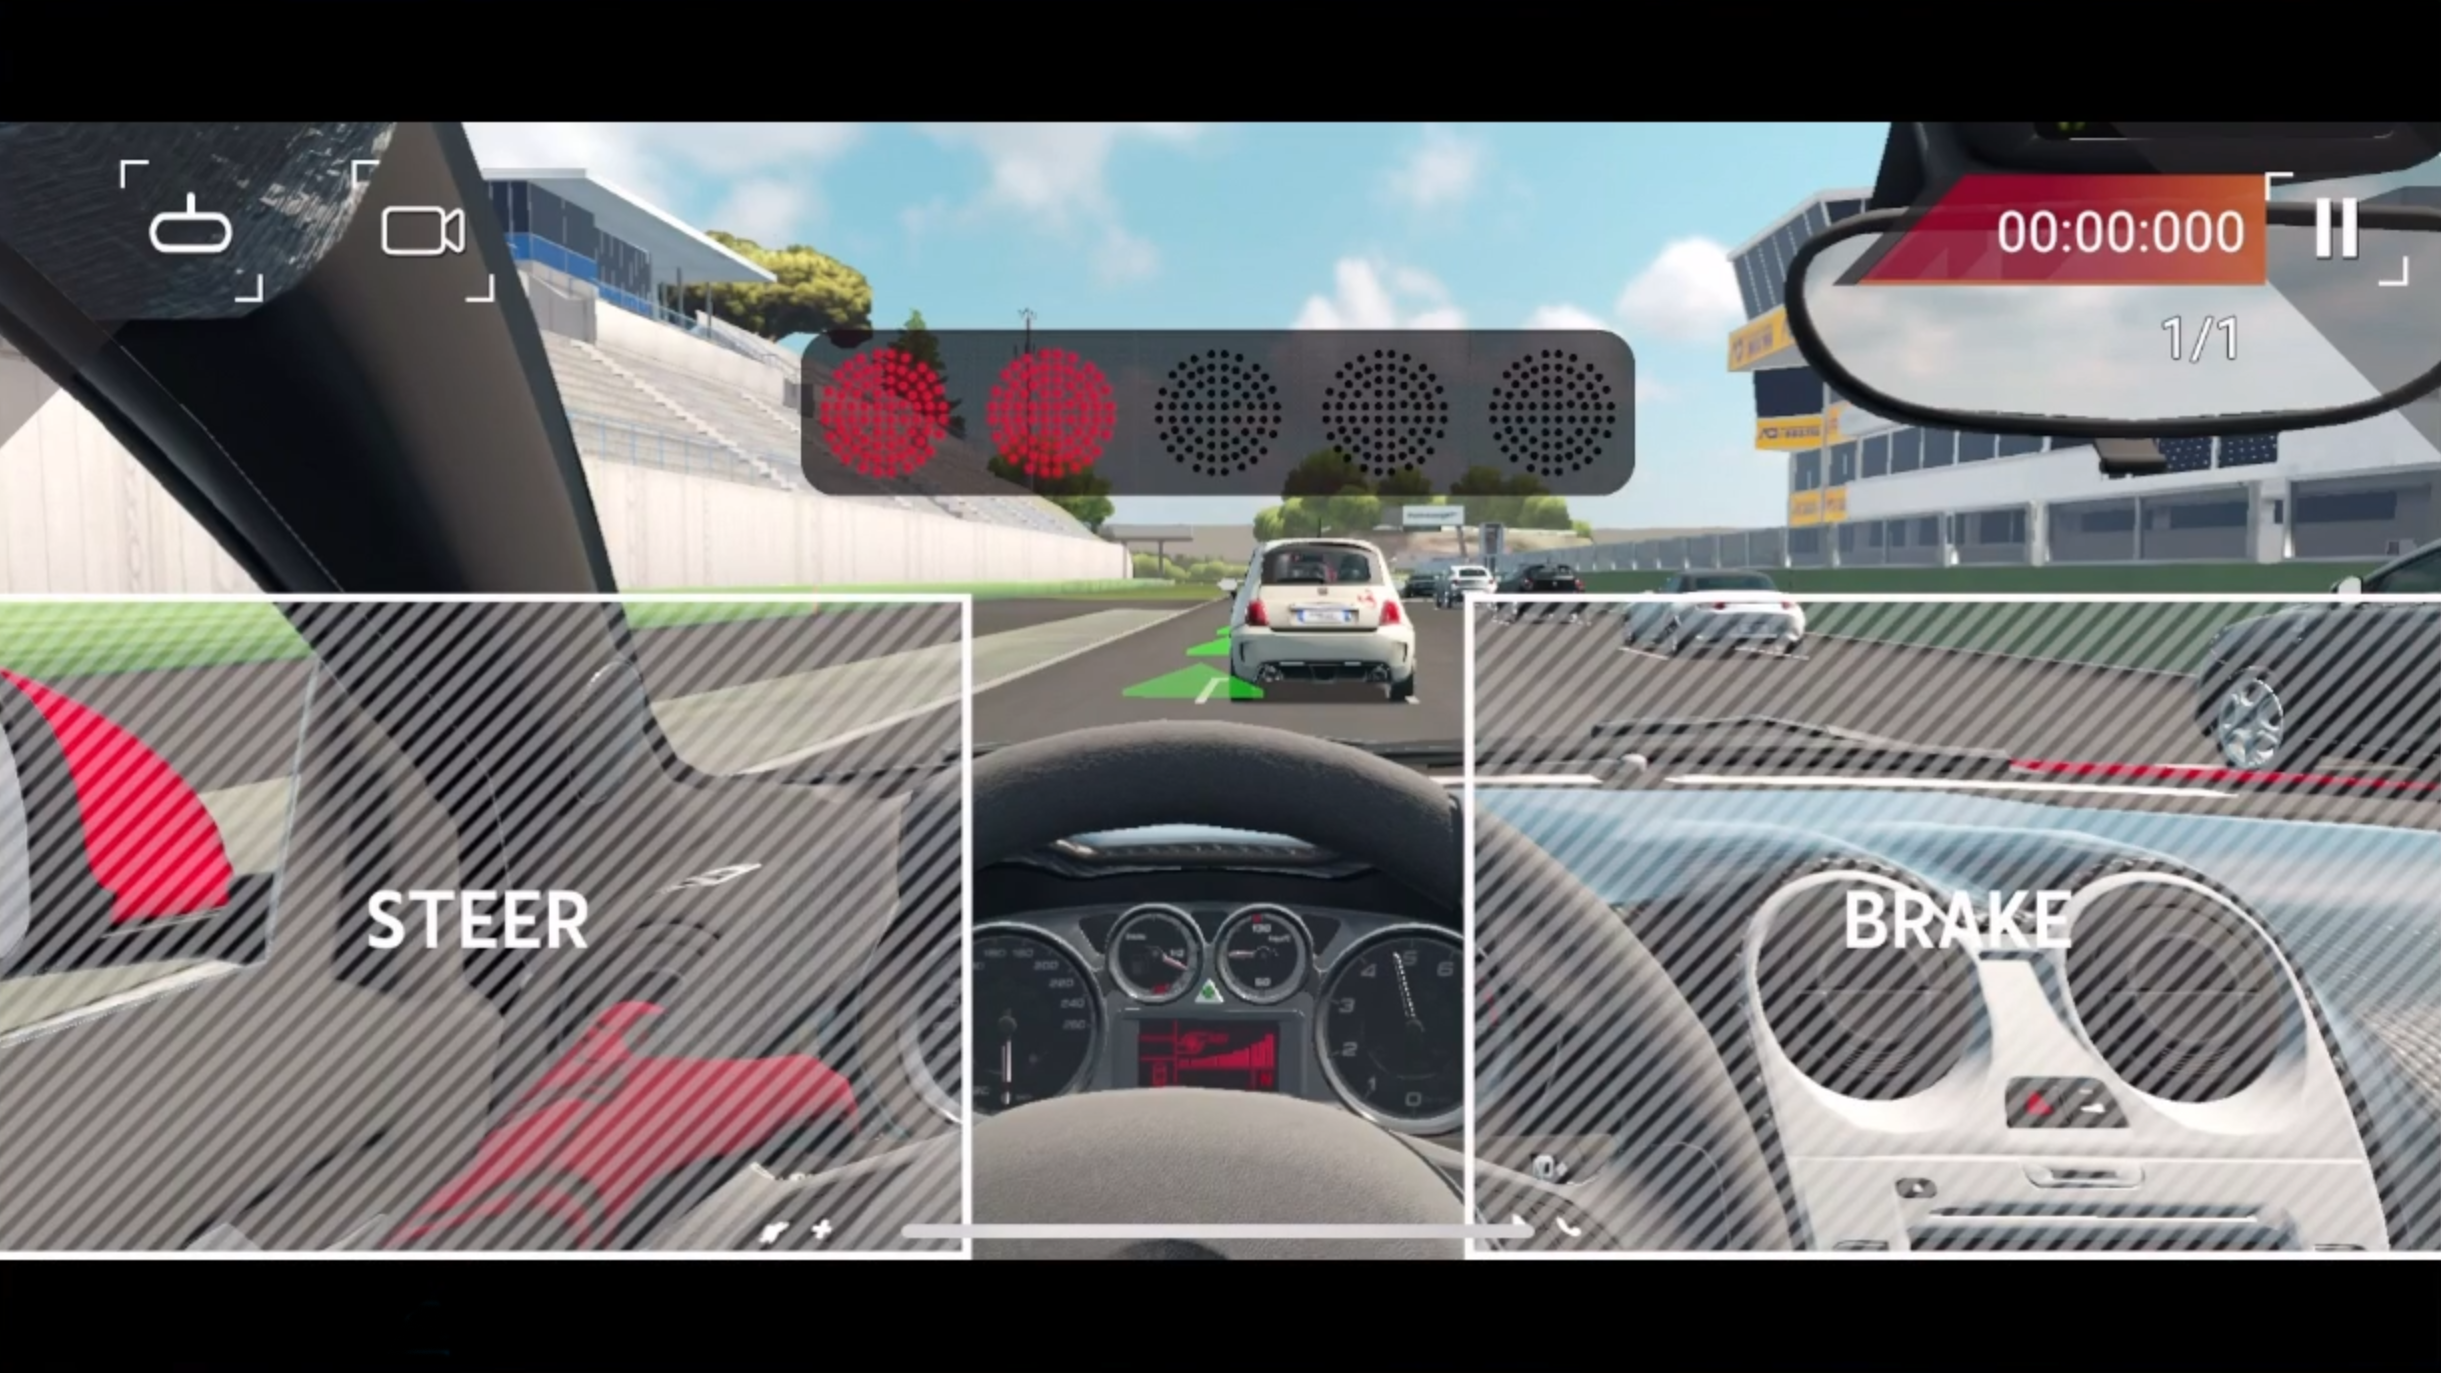 Assetto Corsa 2 Track List: Which circuits can we expect in AC2?